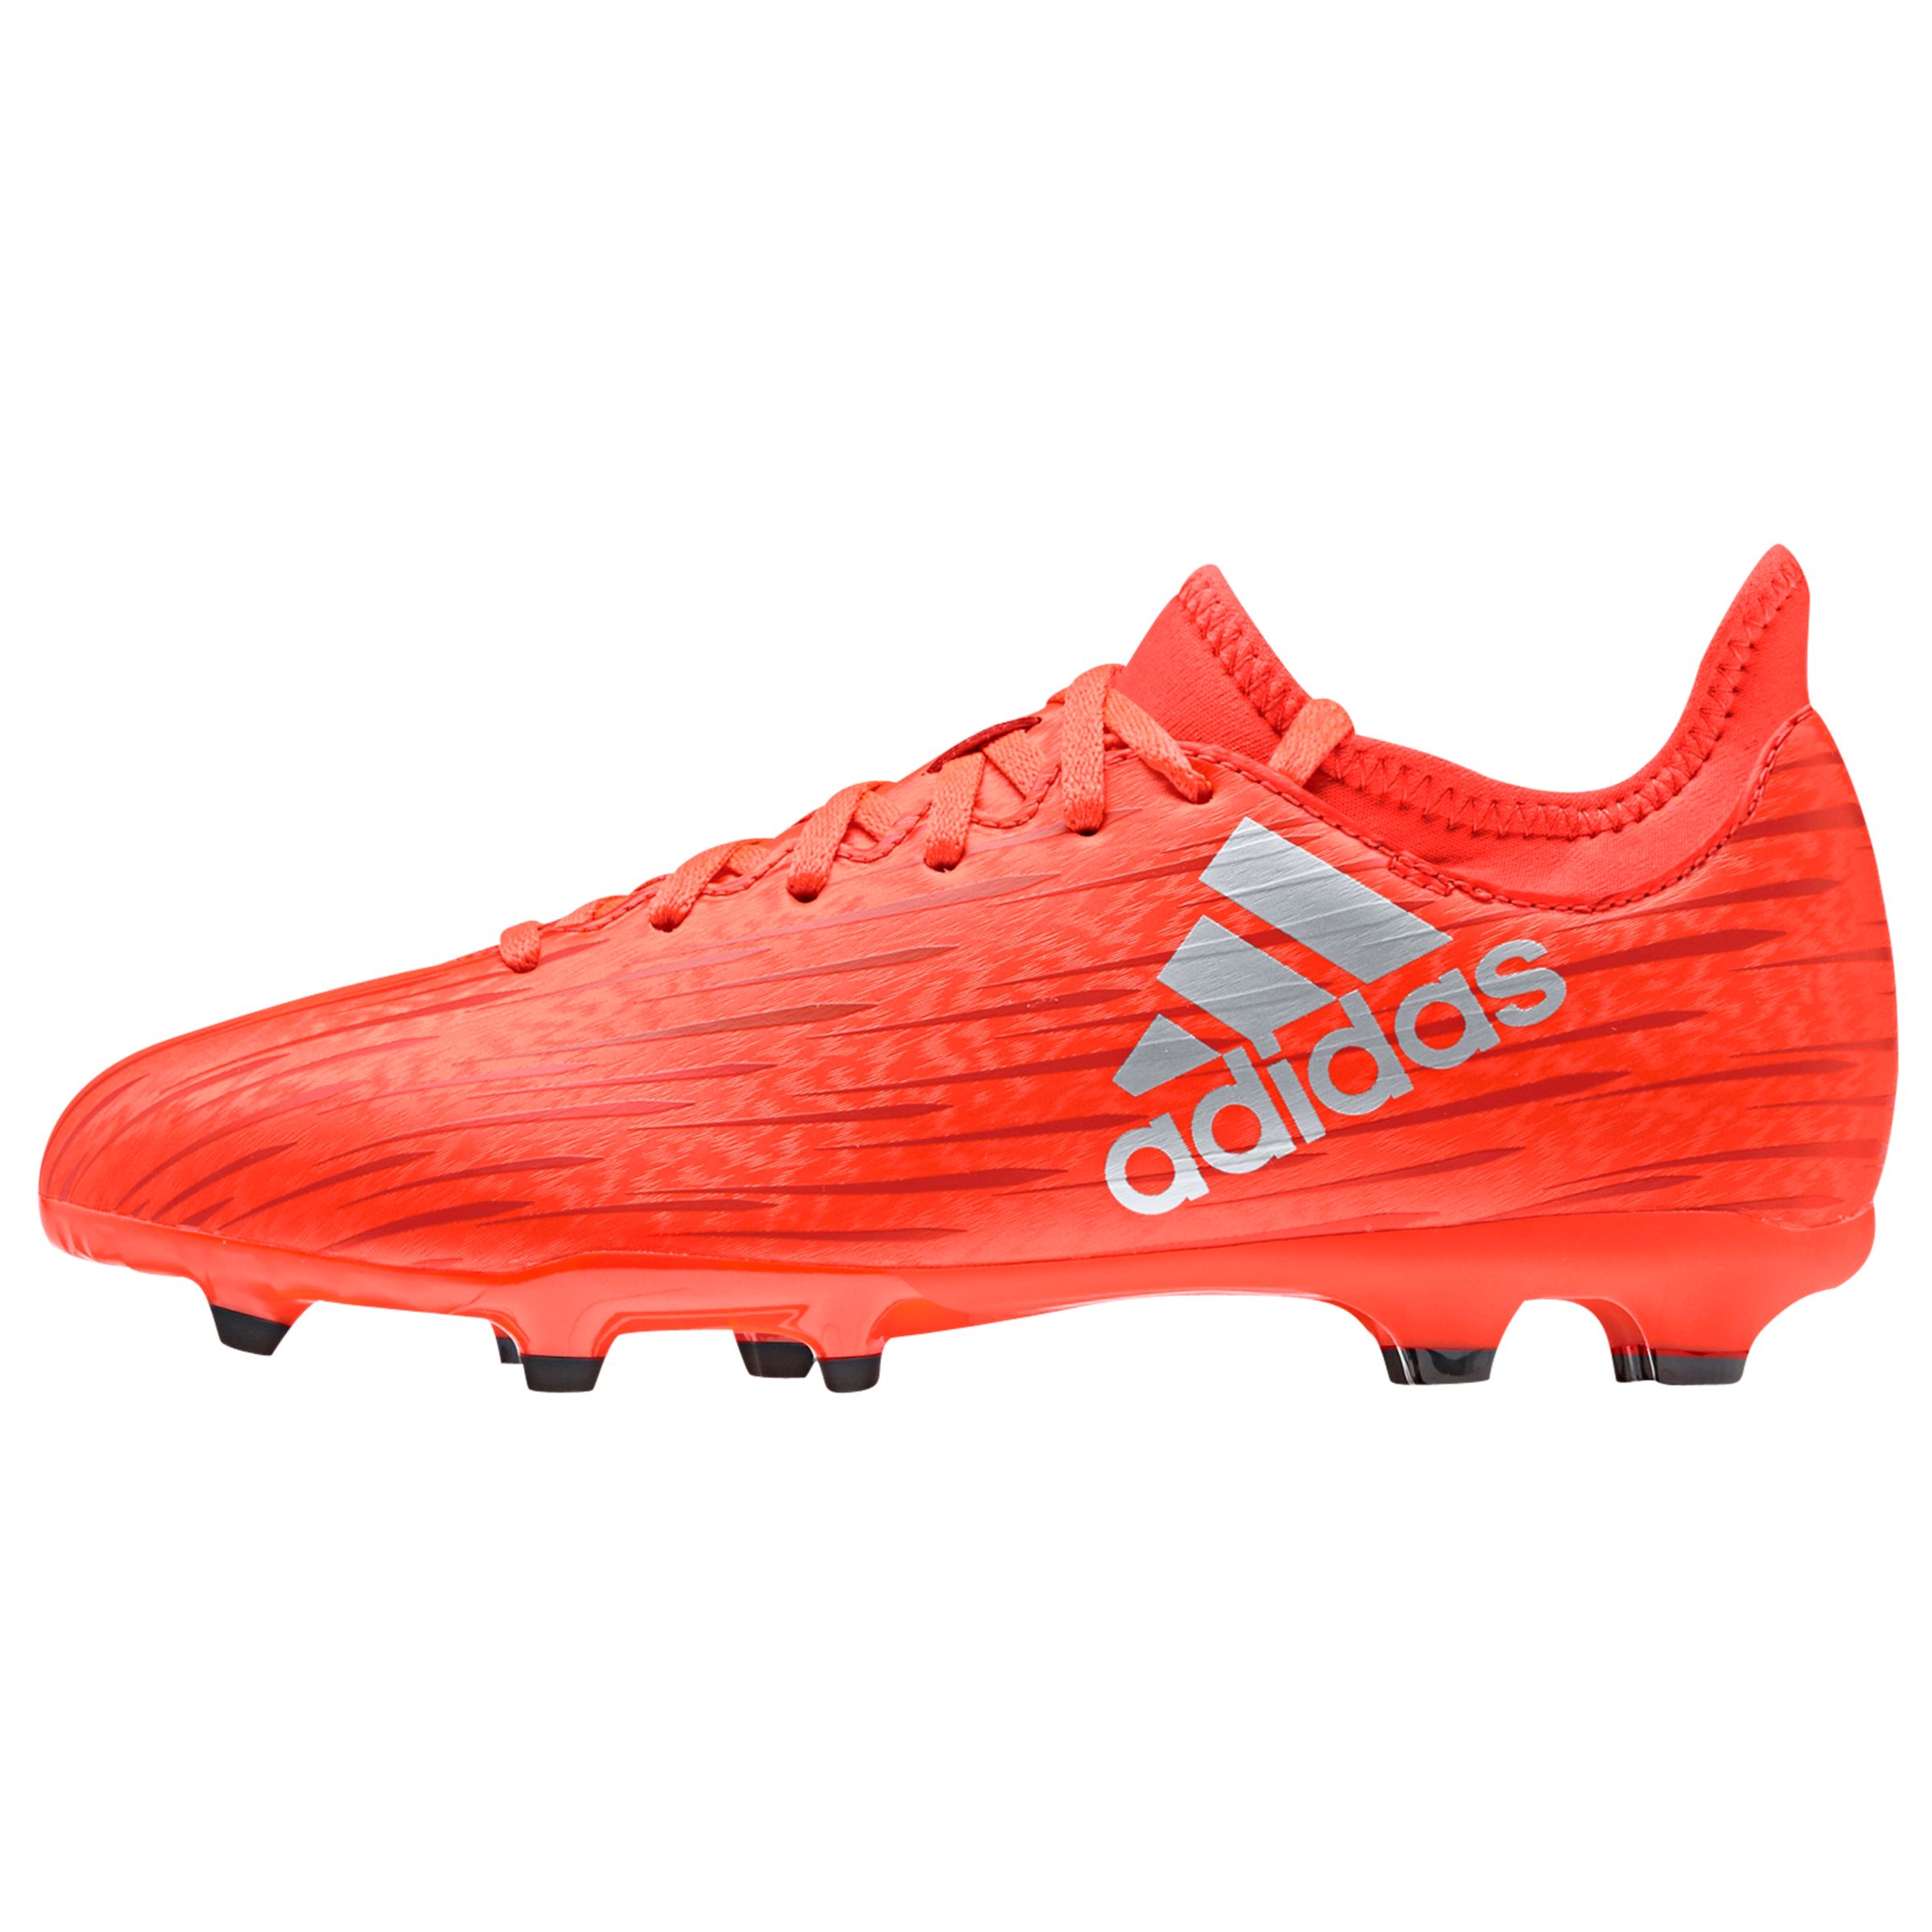 Adidas Children's Solar X 16.3 FG Football Boots, Red/Silver at John Lewis  \u0026 Partners